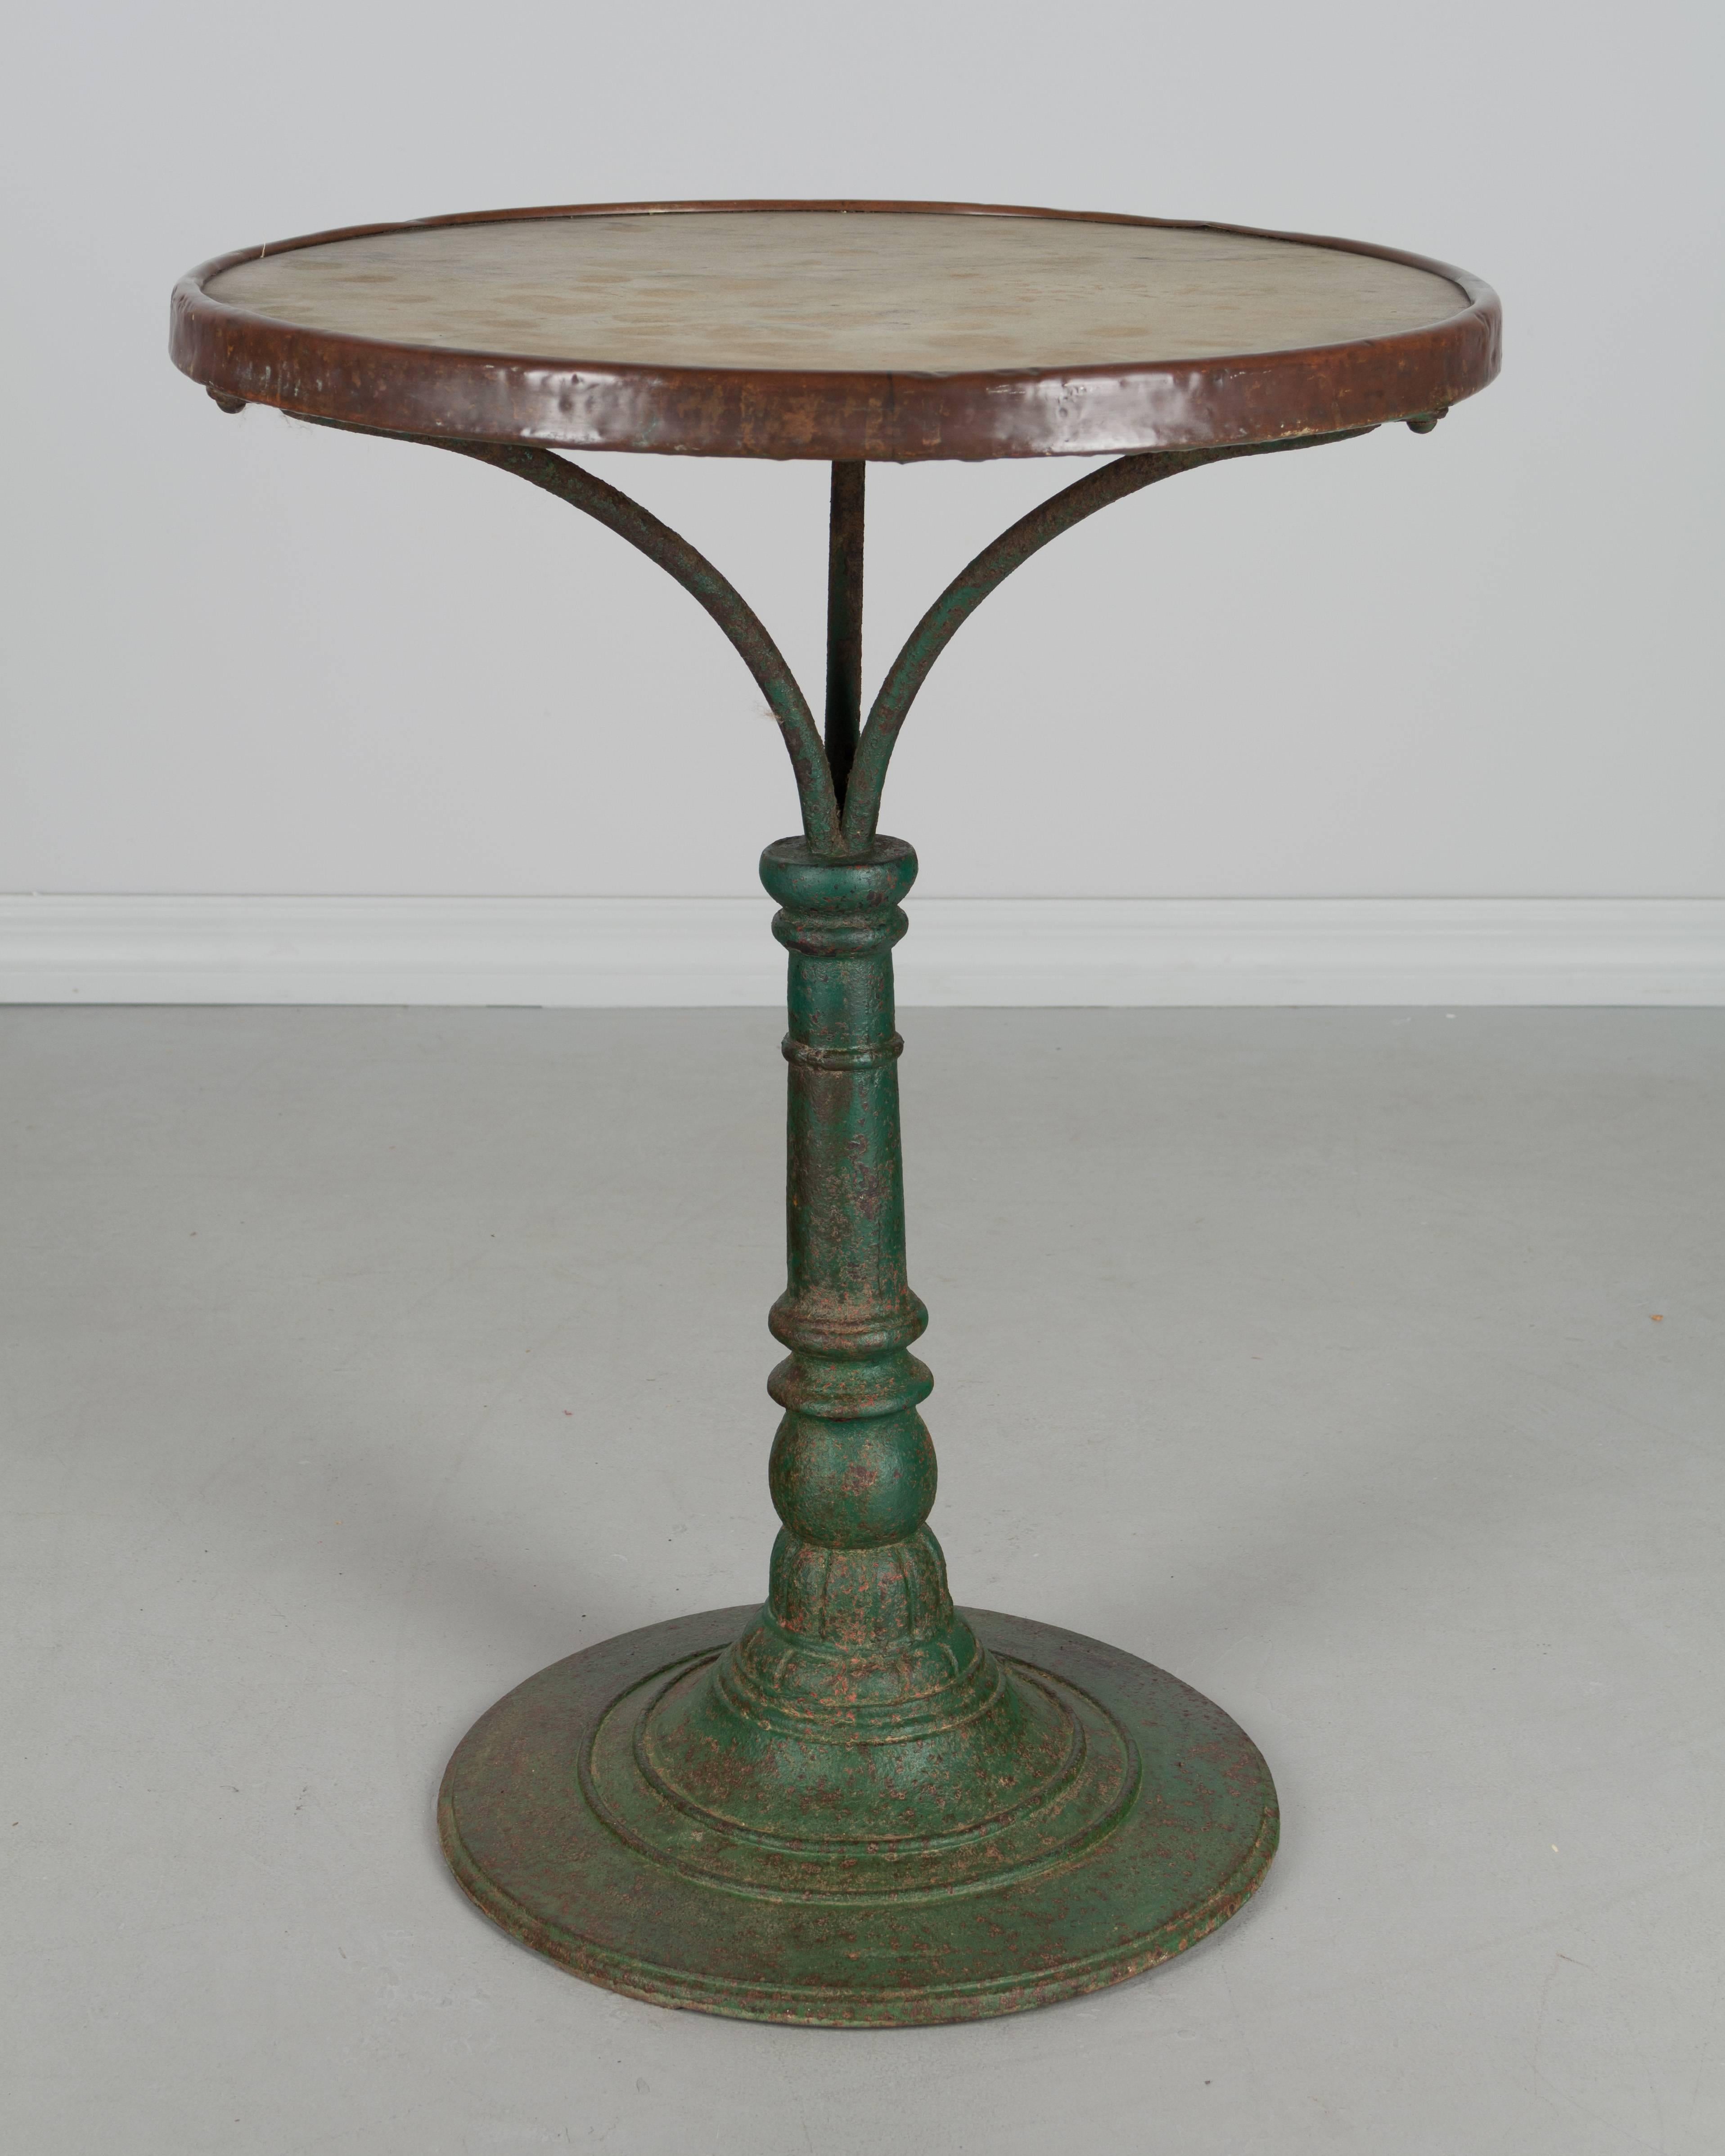 A 19th century. French cast iron bistro table with old green painted patina. Original marble-top with brass rim.
More photos available upon request. We have a large selection of French antiques. Please visit our showroom in Winter Park, Florida.